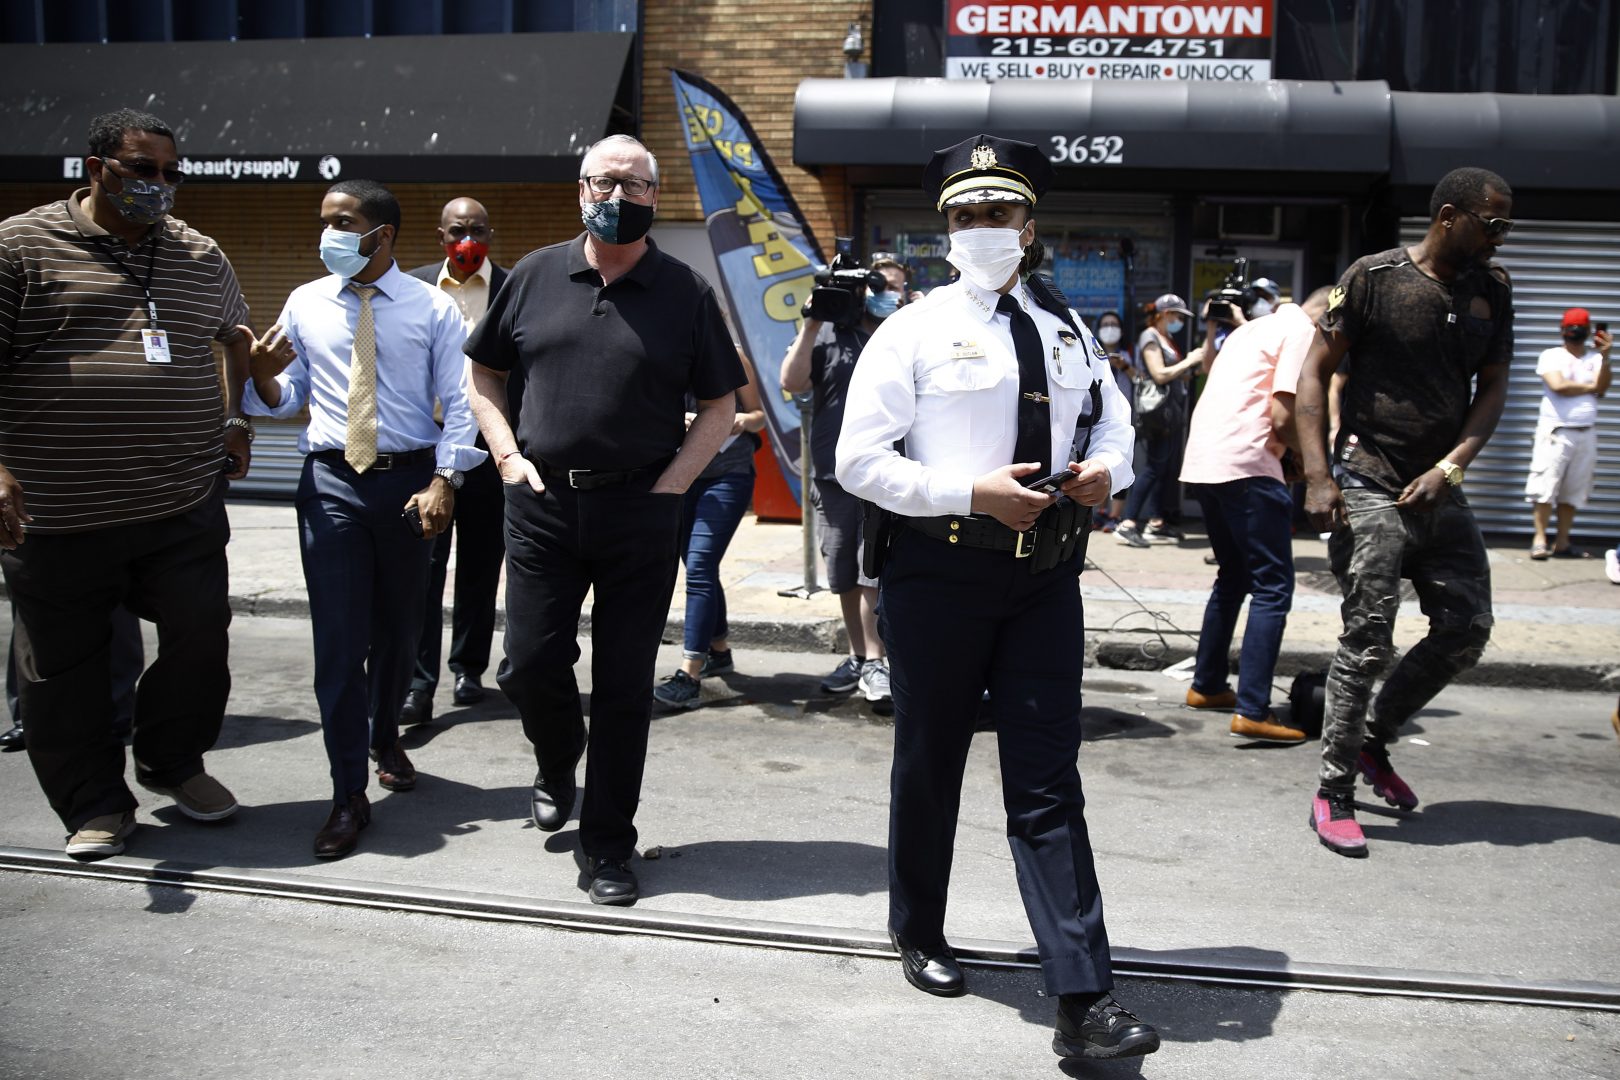 Philadelphia Police Commissioner Danielle Outlaw, center, and Mayor Jim Kenney, 4th left, meet with people, Thursday, June 4, 2020, in Philadelphia after days of protest over the May 25 death of George Floyd, who died after being restrained by police in Minneapolis. 